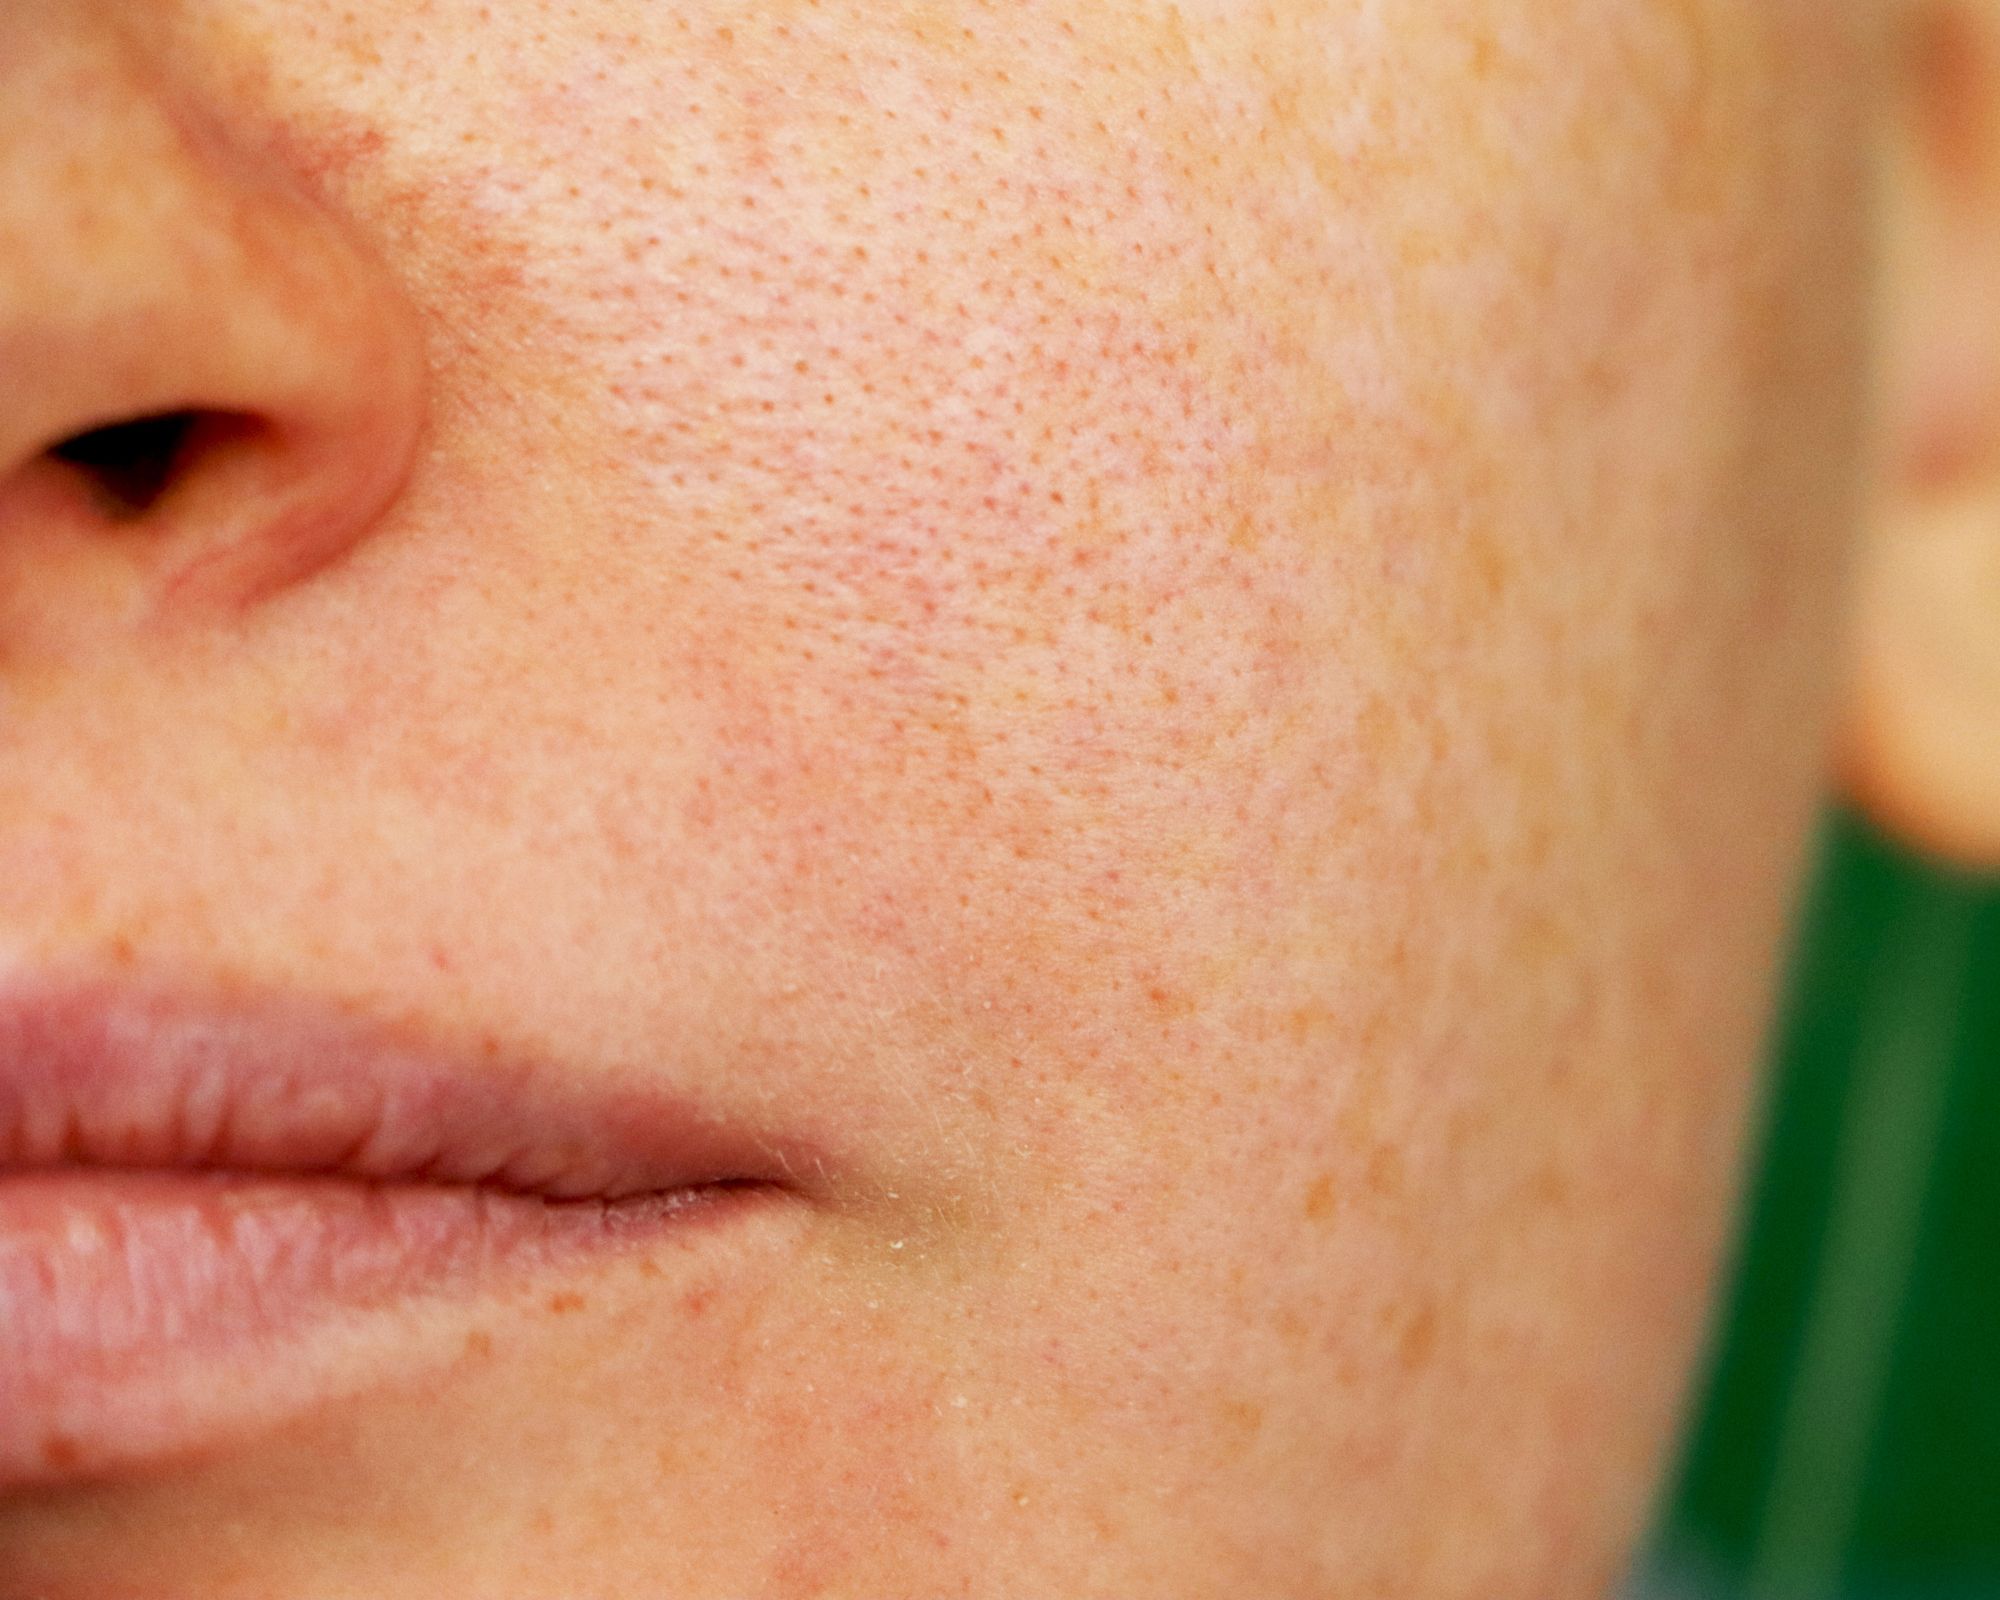 Having Enlarged Pores Pico Laser is Here To Help